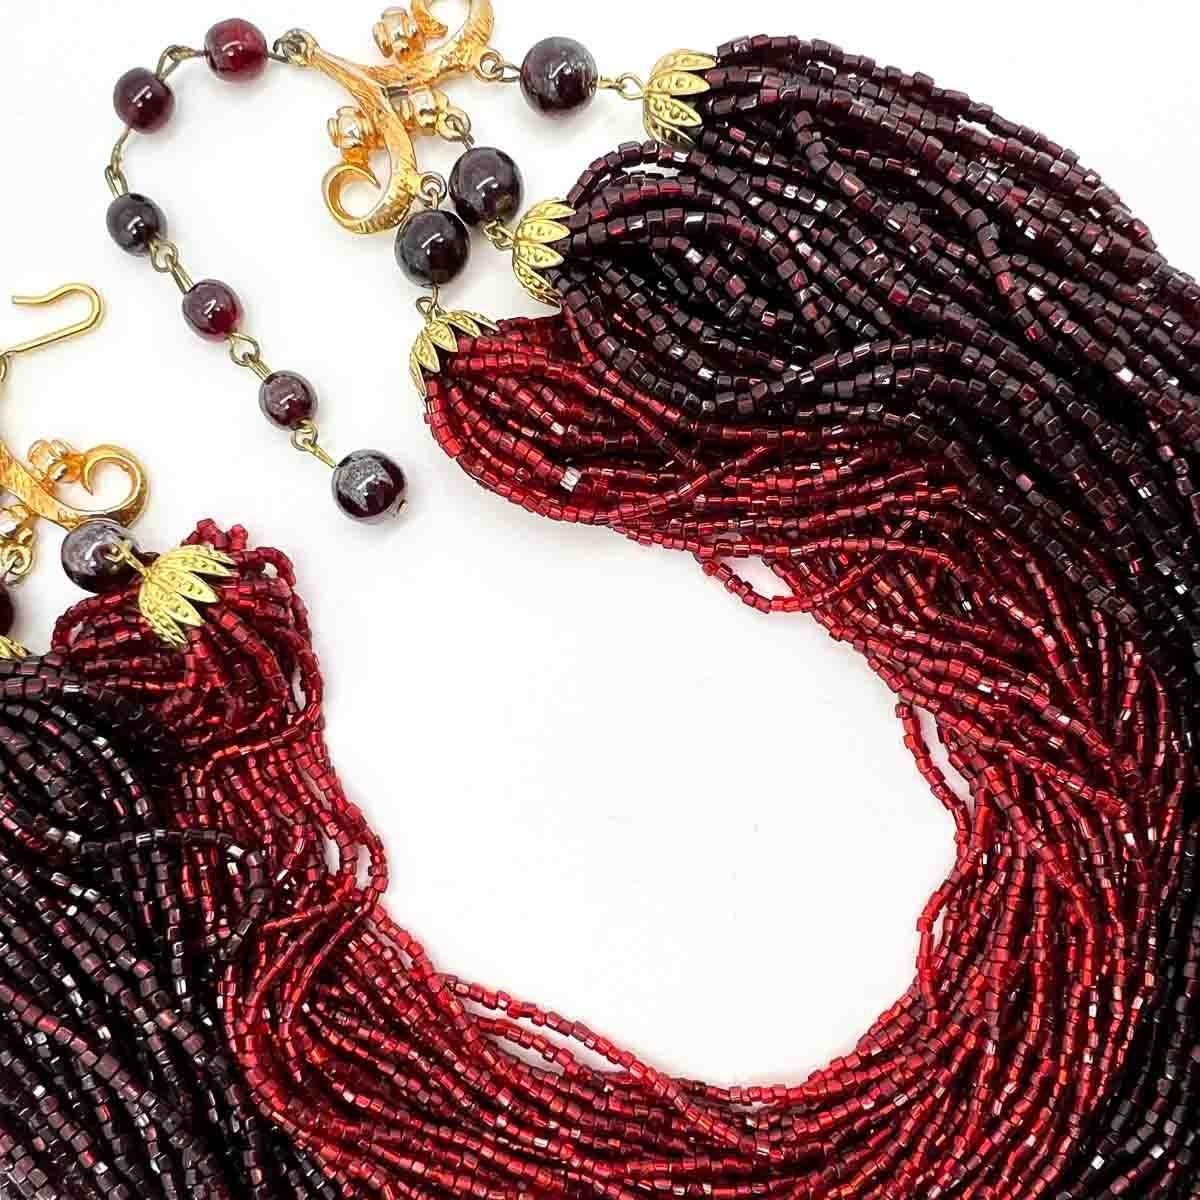 A superb Vintage Ruby Glass Torsade Necklace. The epitome of glam chic, hailing from the 1940s.
An unsigned beauty. A rare treasure. Just because a jewel doesn’t carry a designer name, doesn’t mean it isn't coveted. The unsigned beauties in our